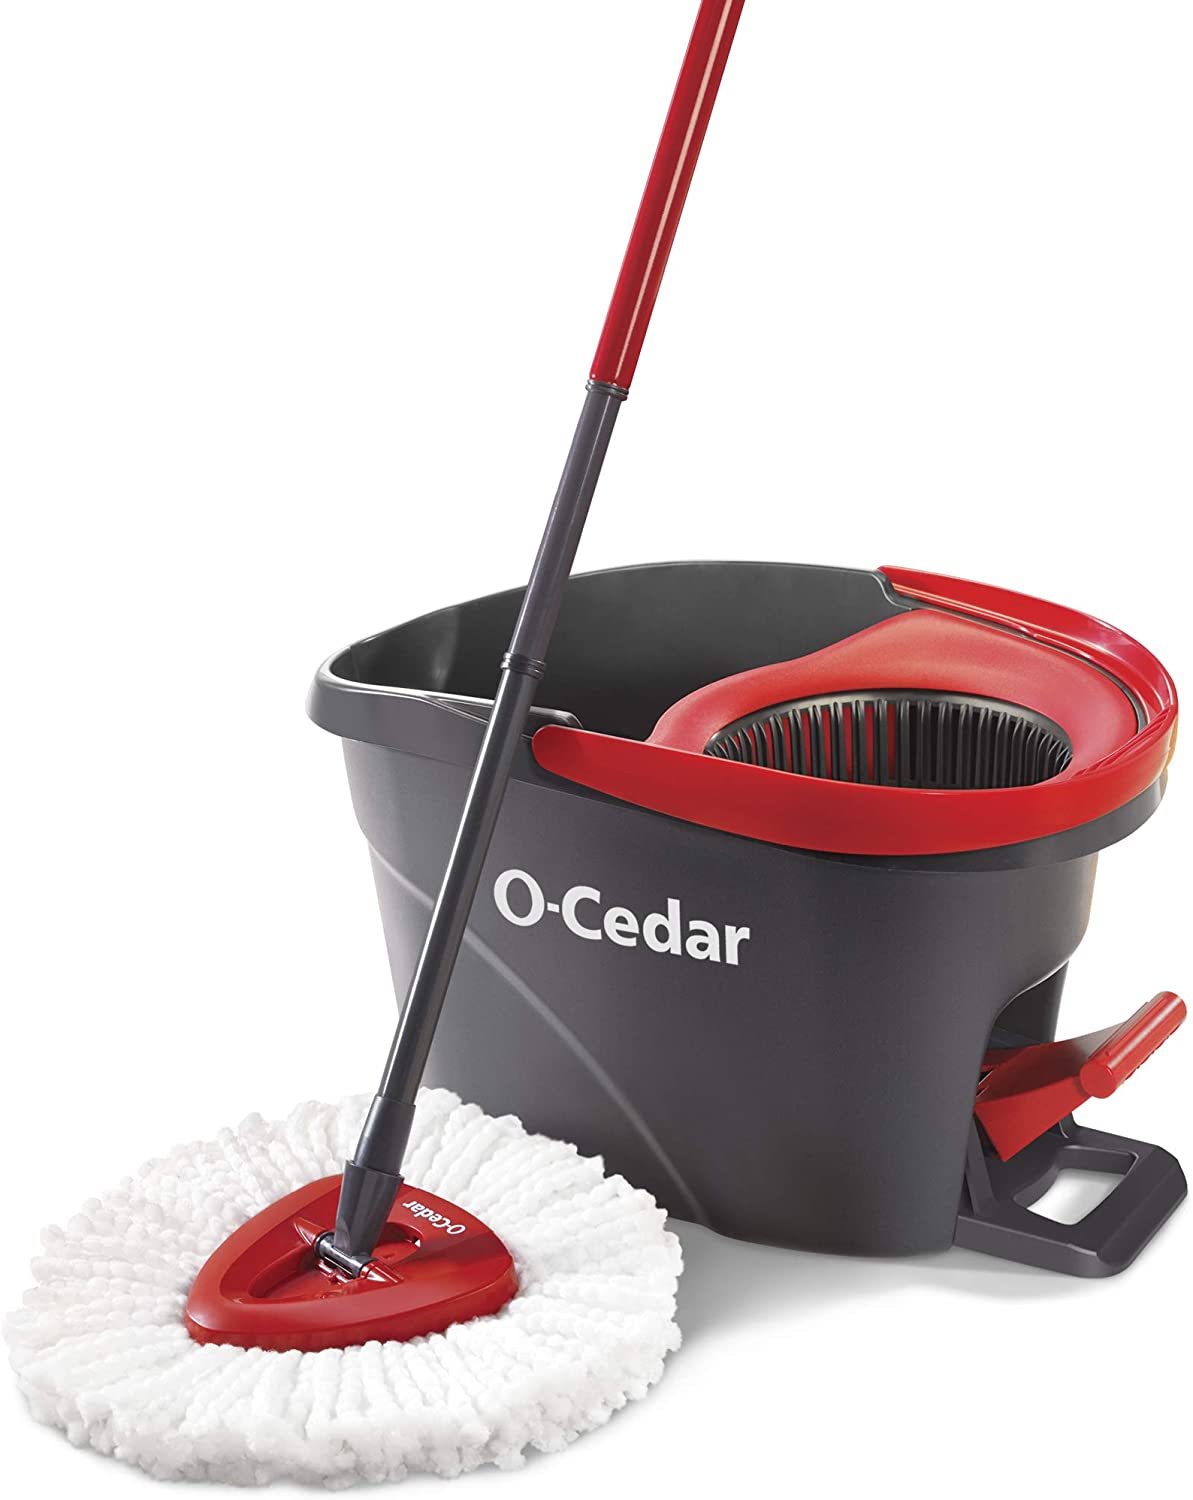 O-Cedar EasyWring Microfiber Spin Mop, Bucket Floor Cleaning System, Red, Gray 47